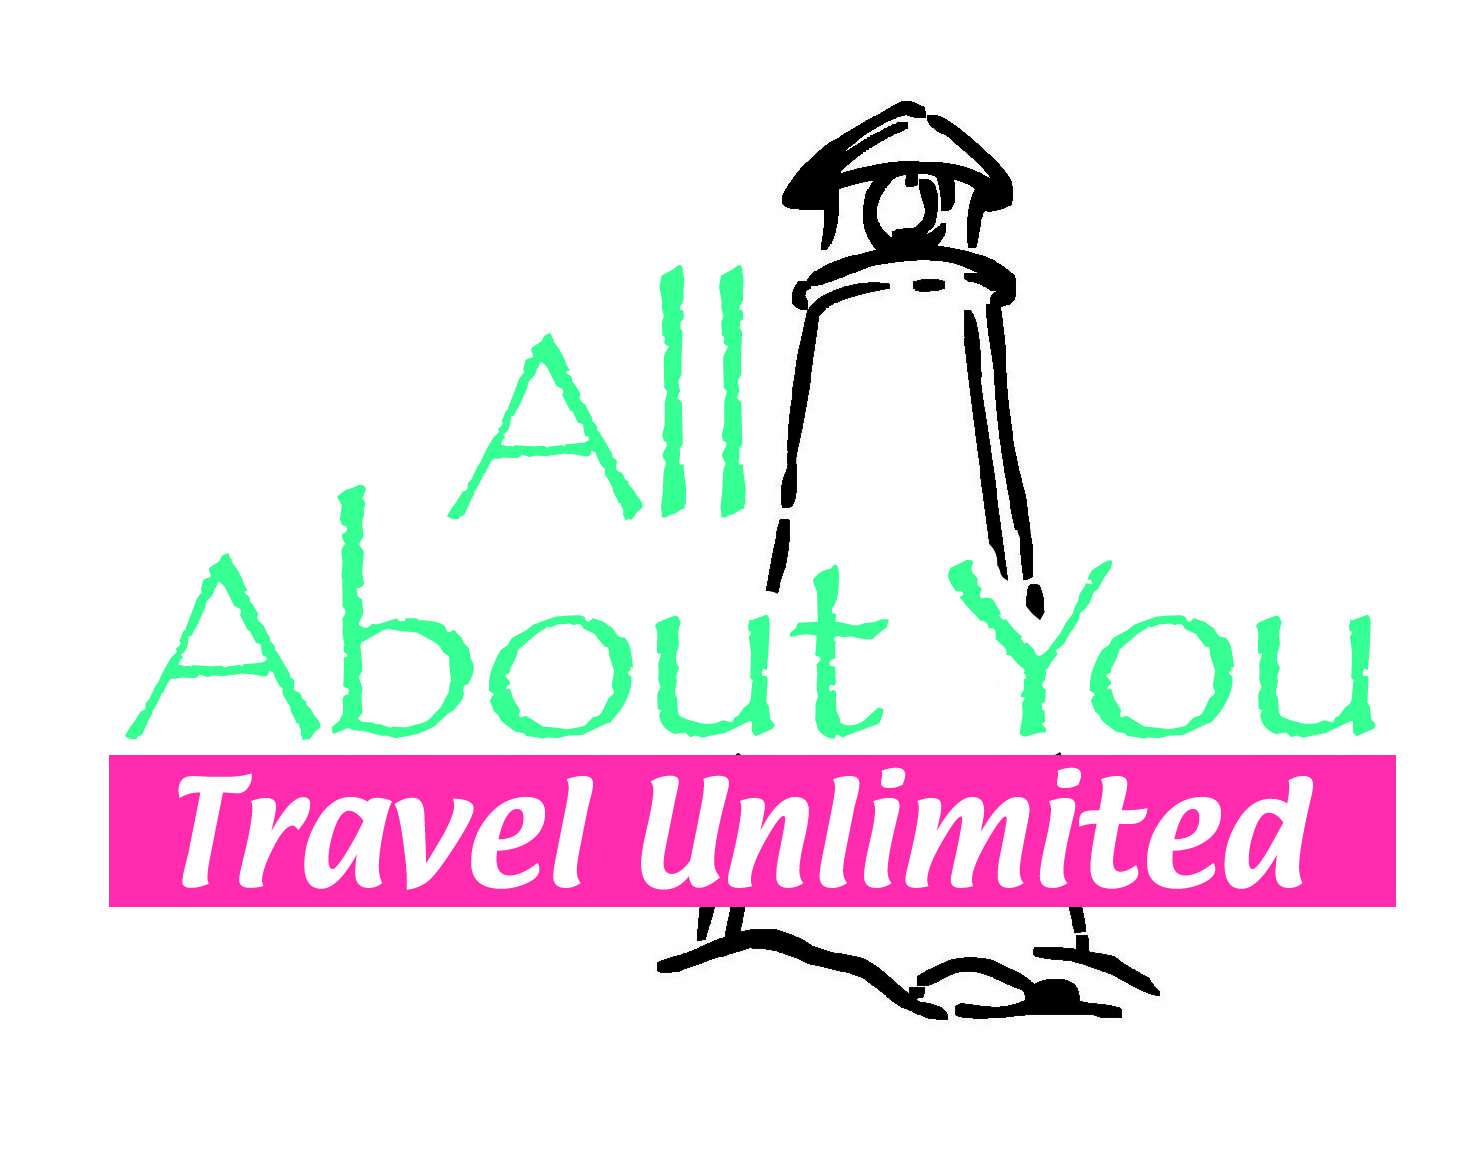 my travel services unlimited